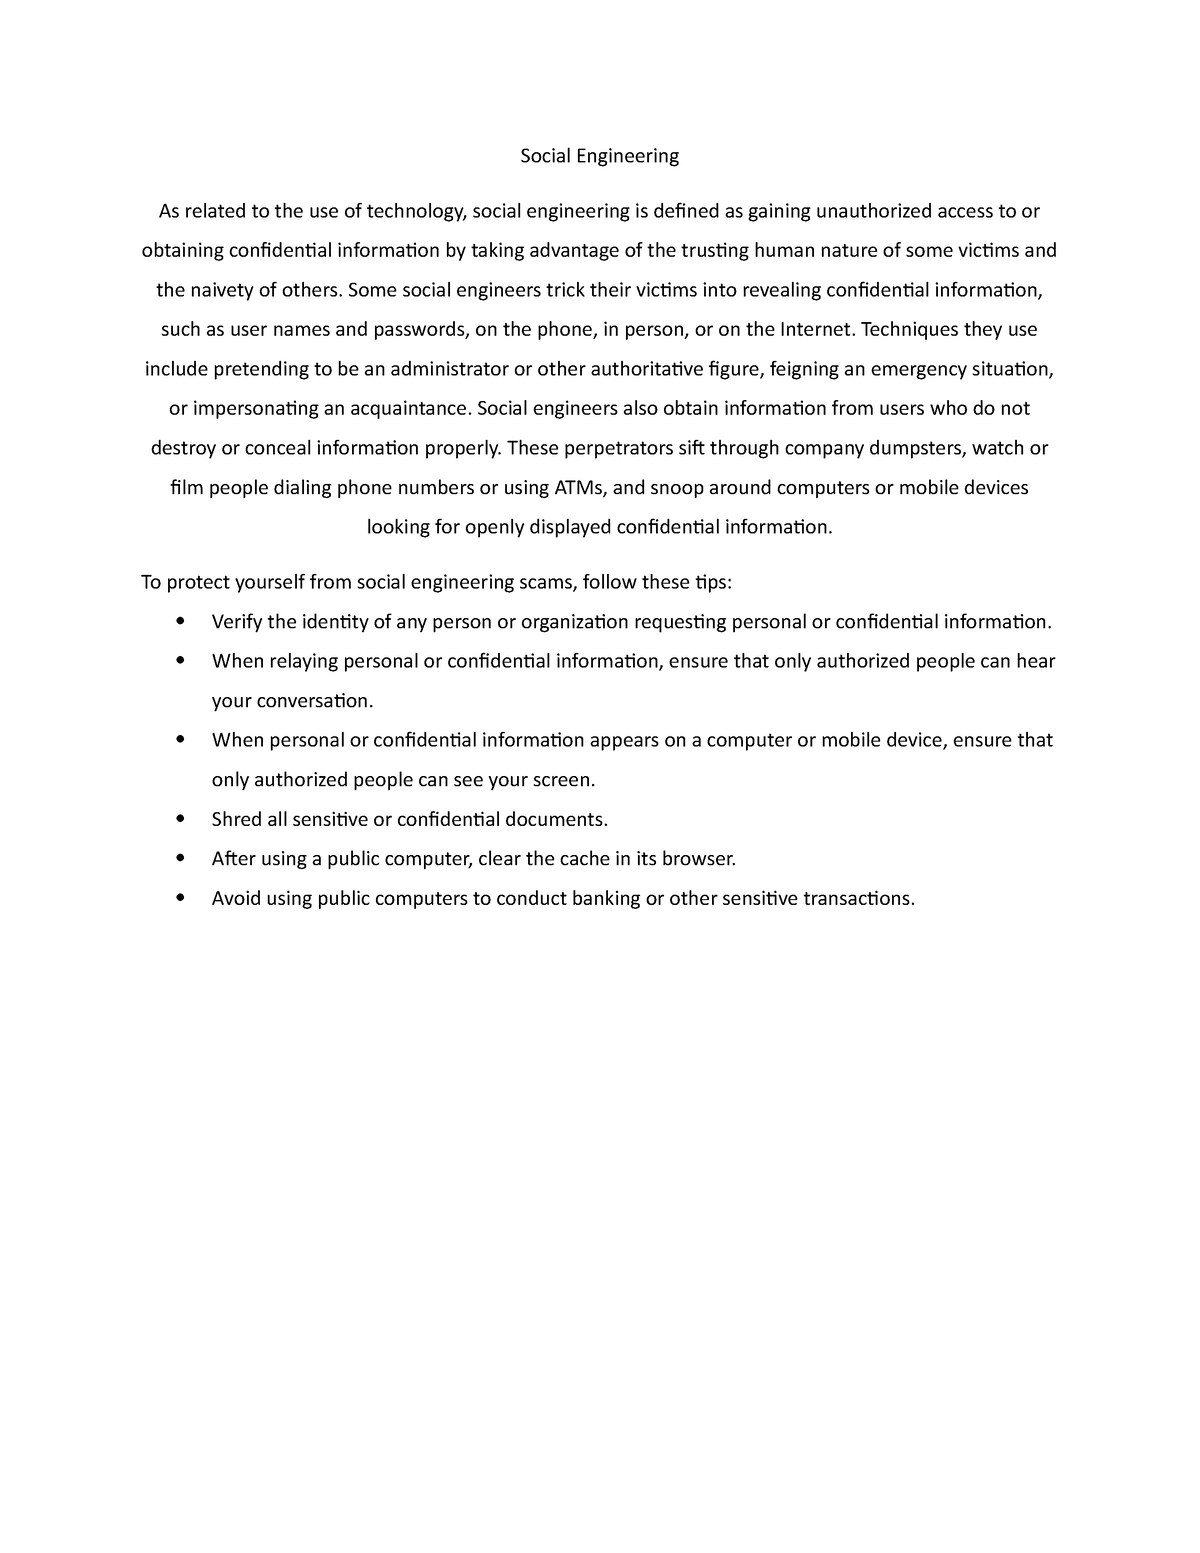 research paper social engineering